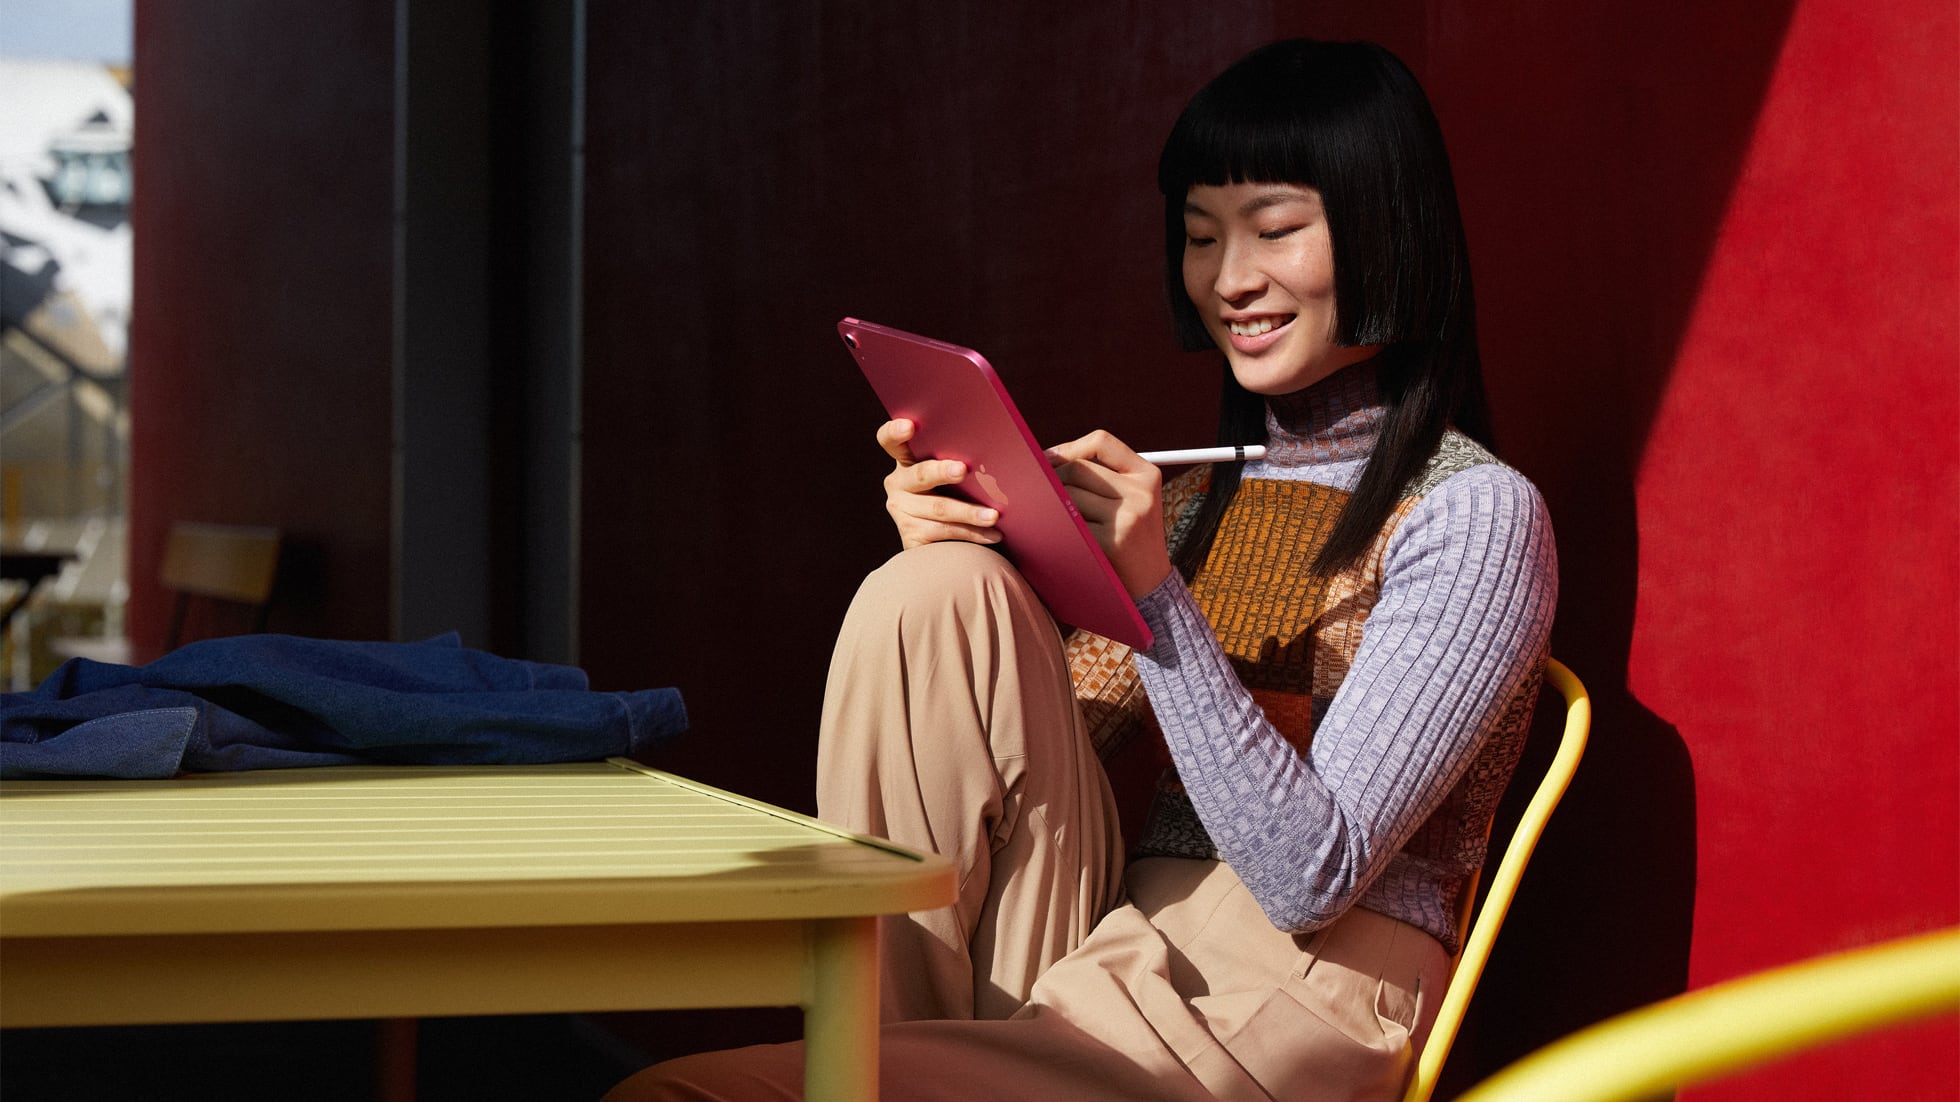 A young woman holding a tenth-generation iPad in one hand and using an Apple Pencil in the other is depicted in this lifestyle image from Apple